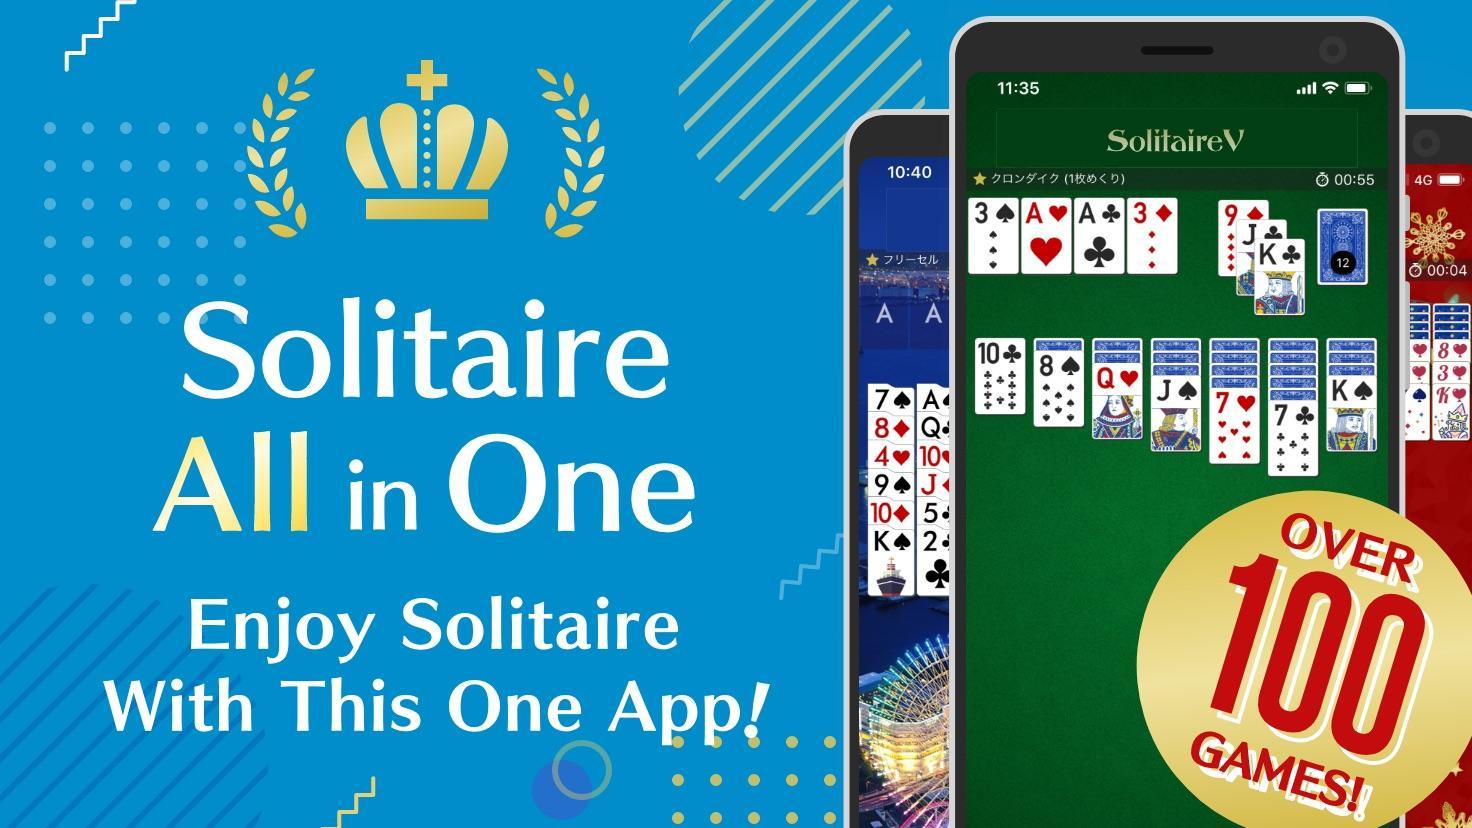 Solitaire Victory - 2020 Solitaire Collection 100 8.3.2 Screenshot 1